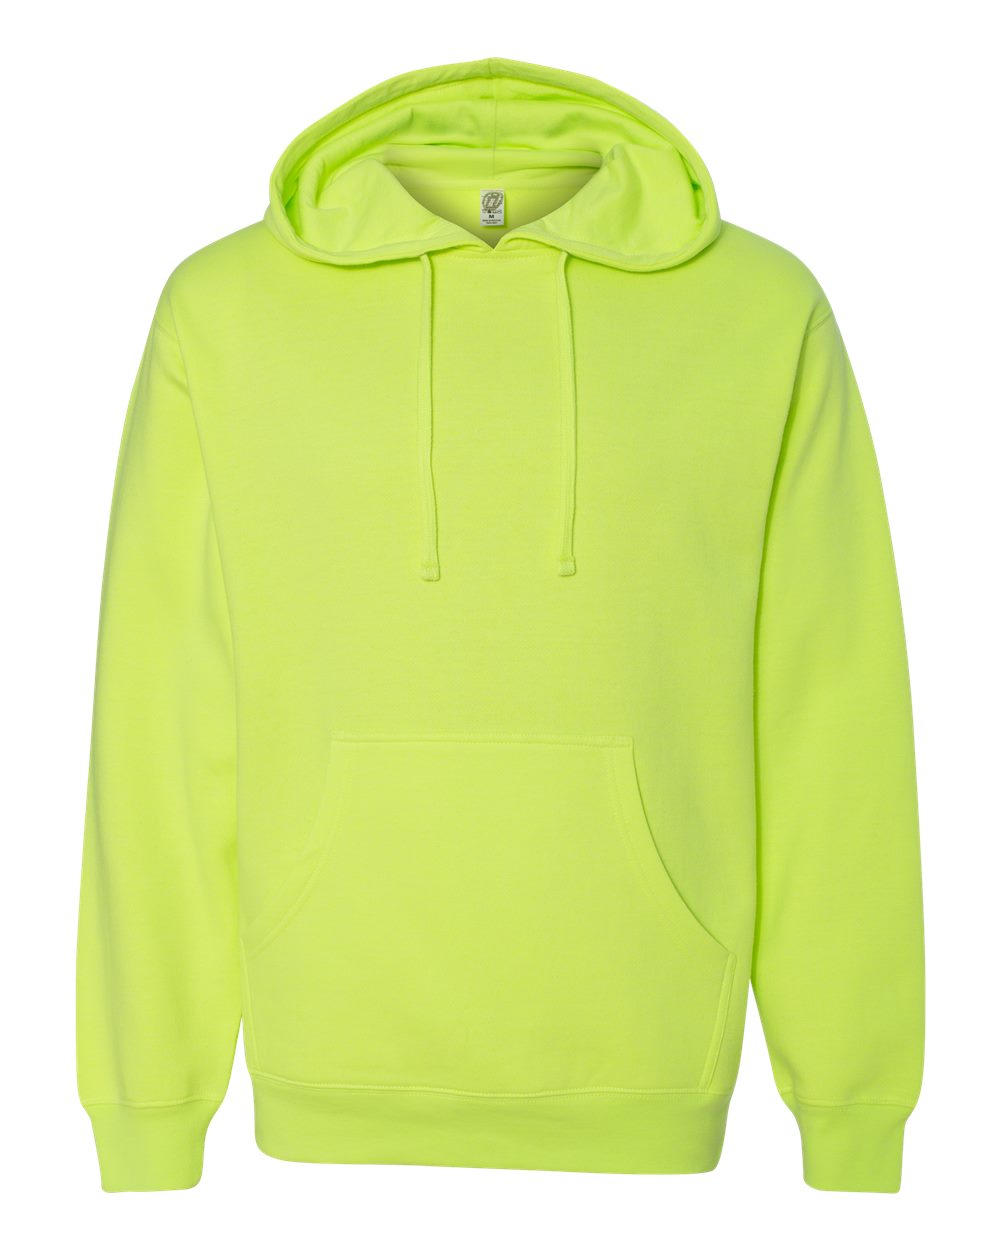 Midweight Hooded Sweatshirt Child Product 3